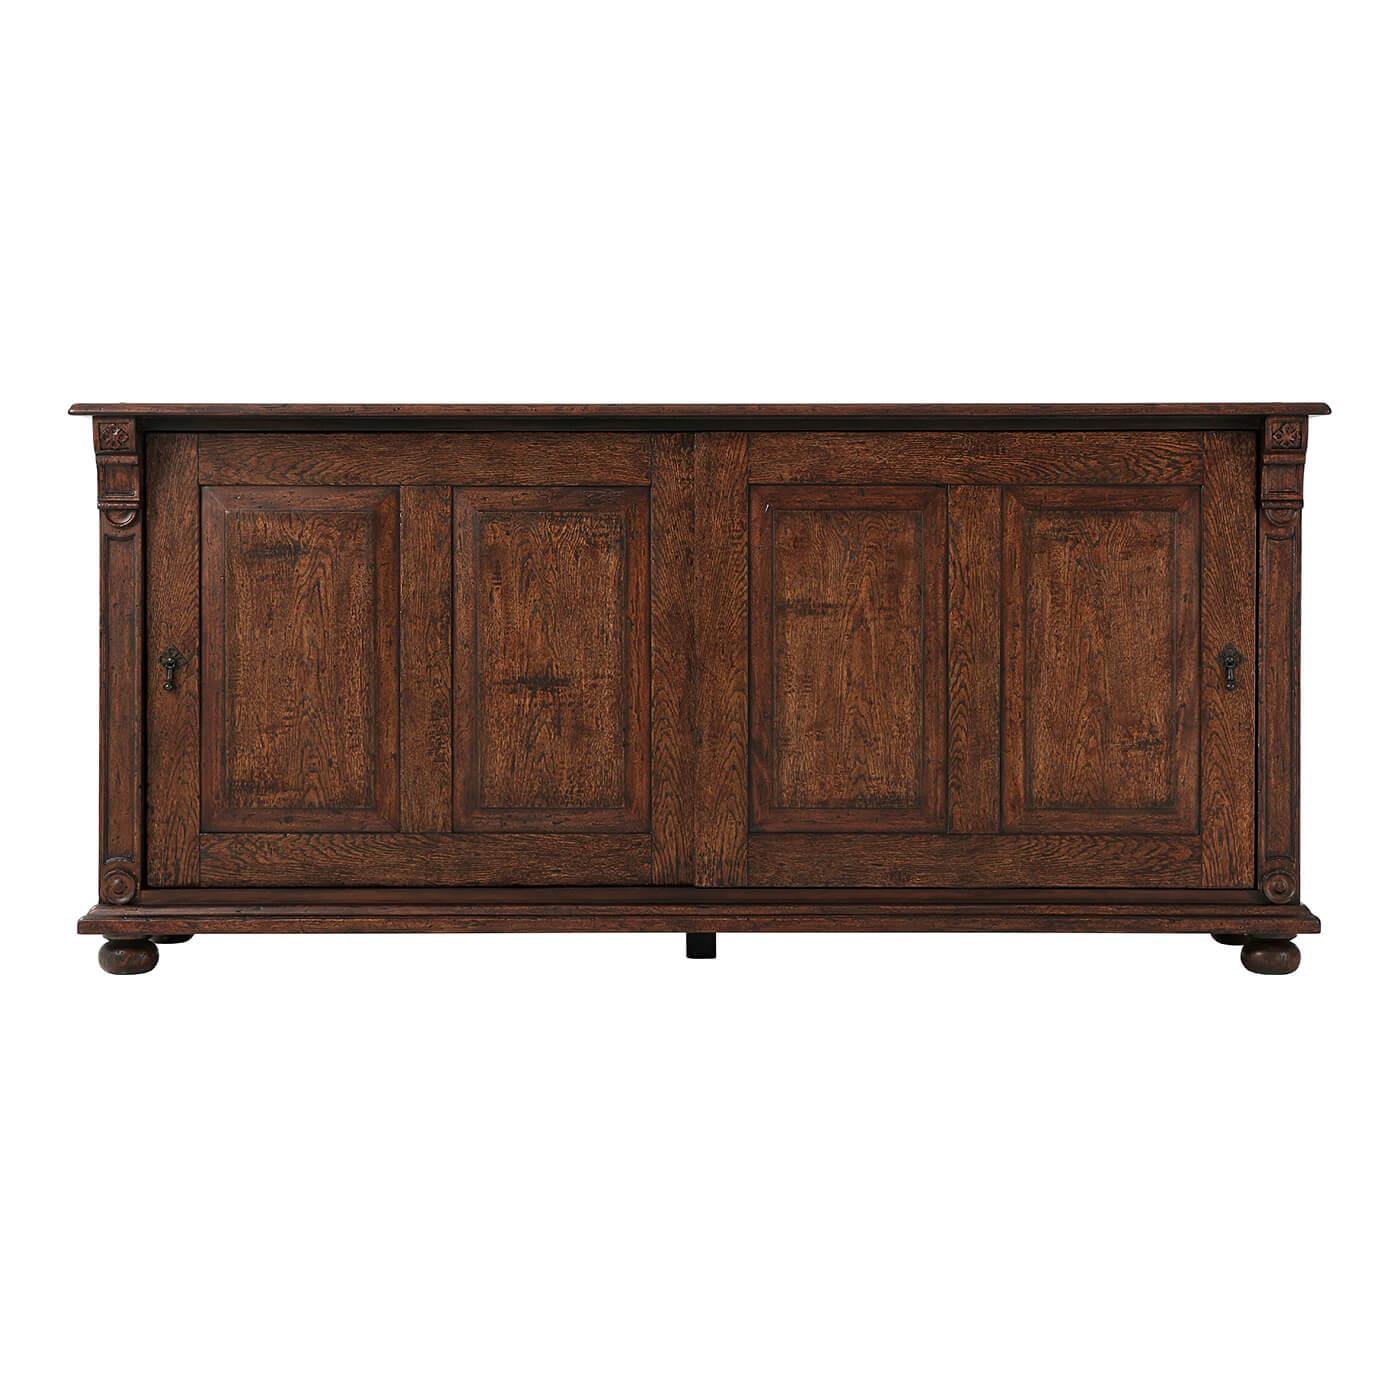 English Country Oak veneered sideboard with sliding doors. The rectangular top features a gentle moulded edge resting over two corbel columns and two chamfered sliding doors enclosing two drawers and an adjustable shelf. All of this rests upon a